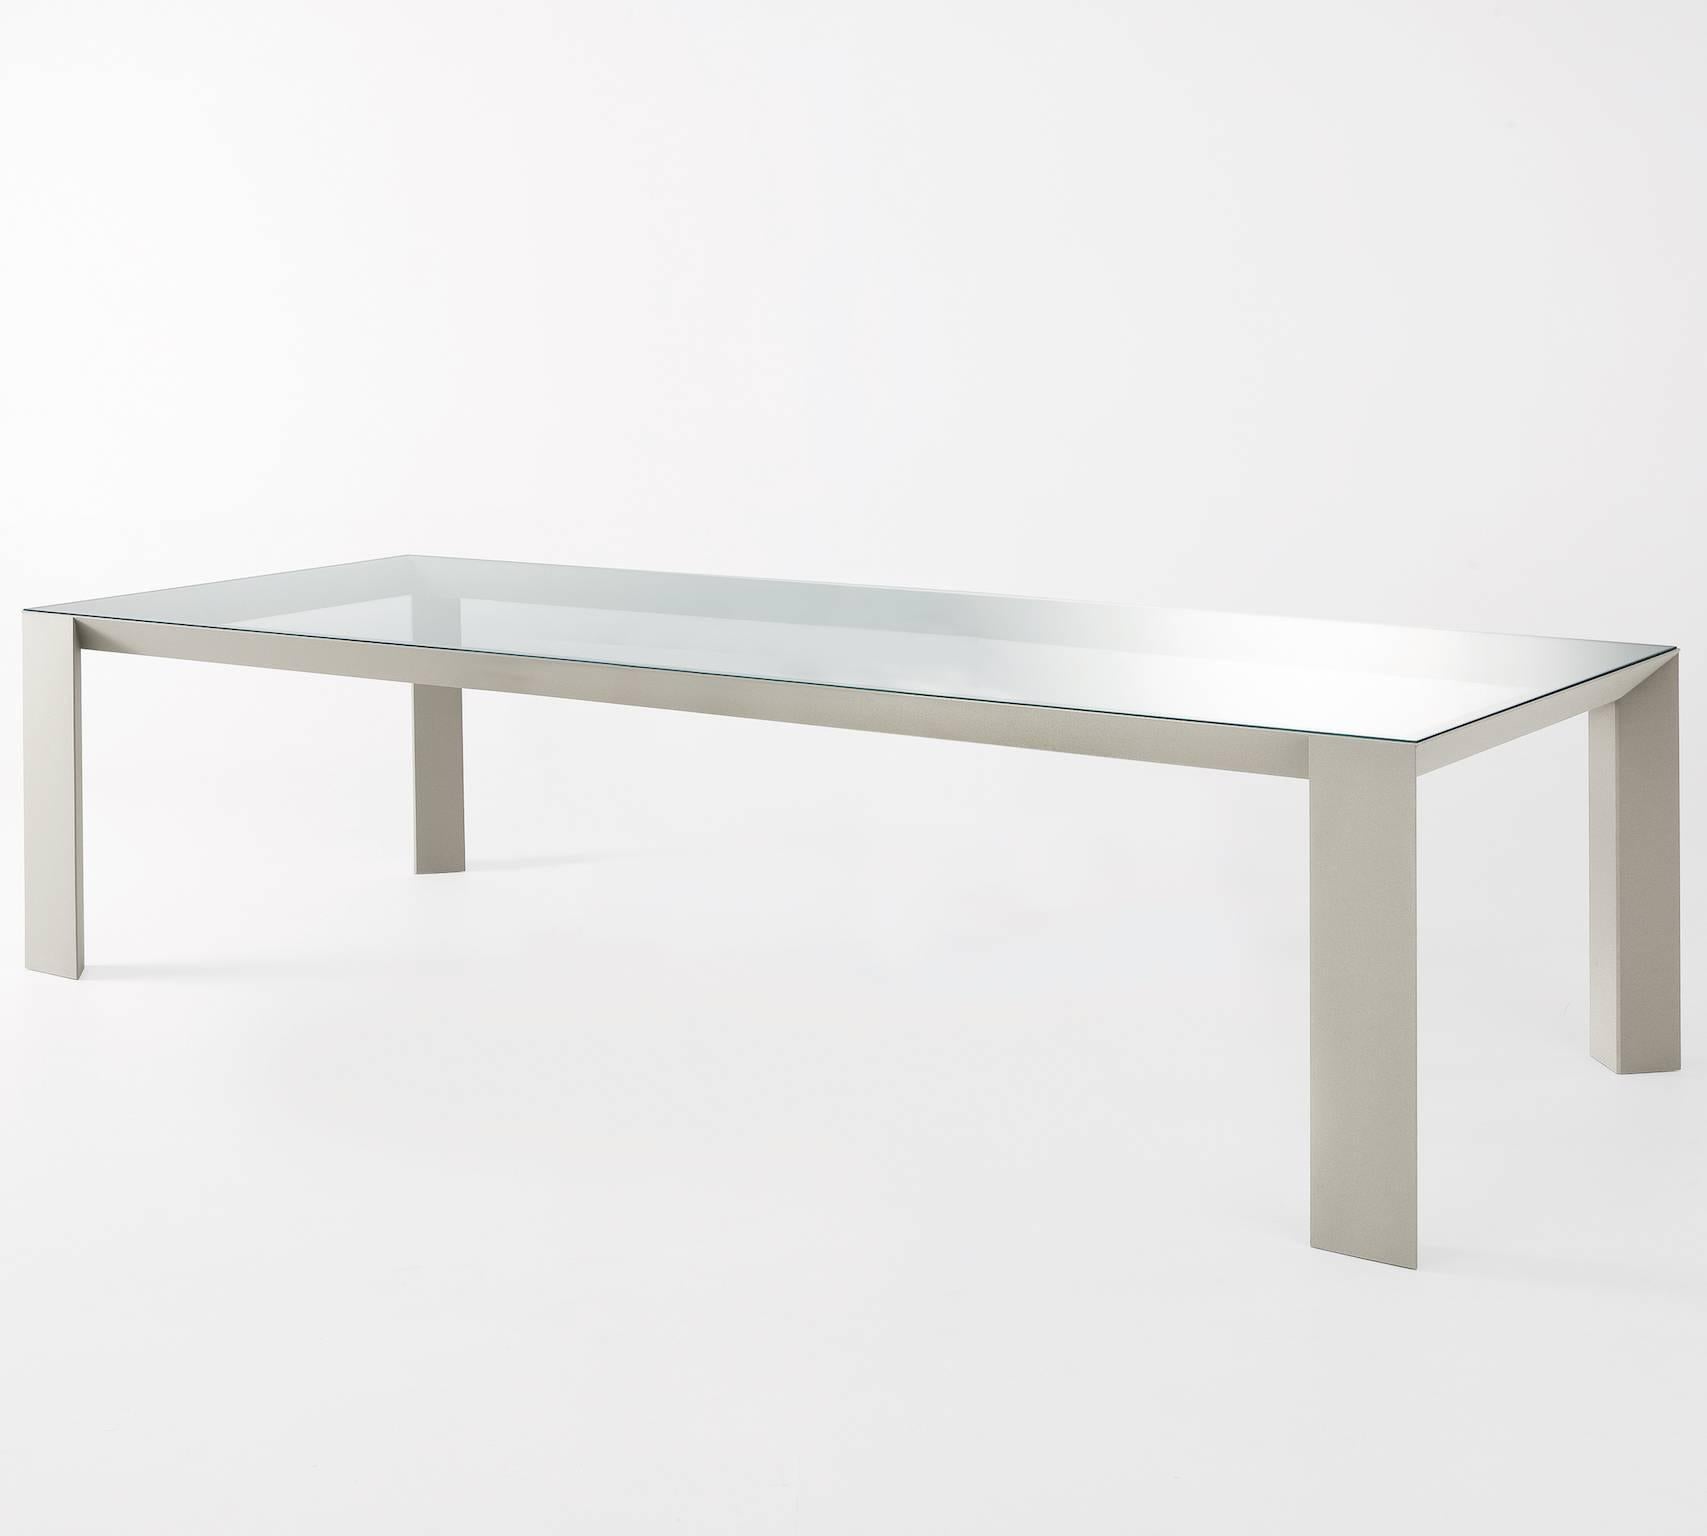 Table with aluminium structure covered by tobacco stained or wengé stained oak.
Available also with embossed white or black lacquered structure or “fabric” touch effect lacquered structure in the chestnut, sand and canapa colors.
12mm transparent